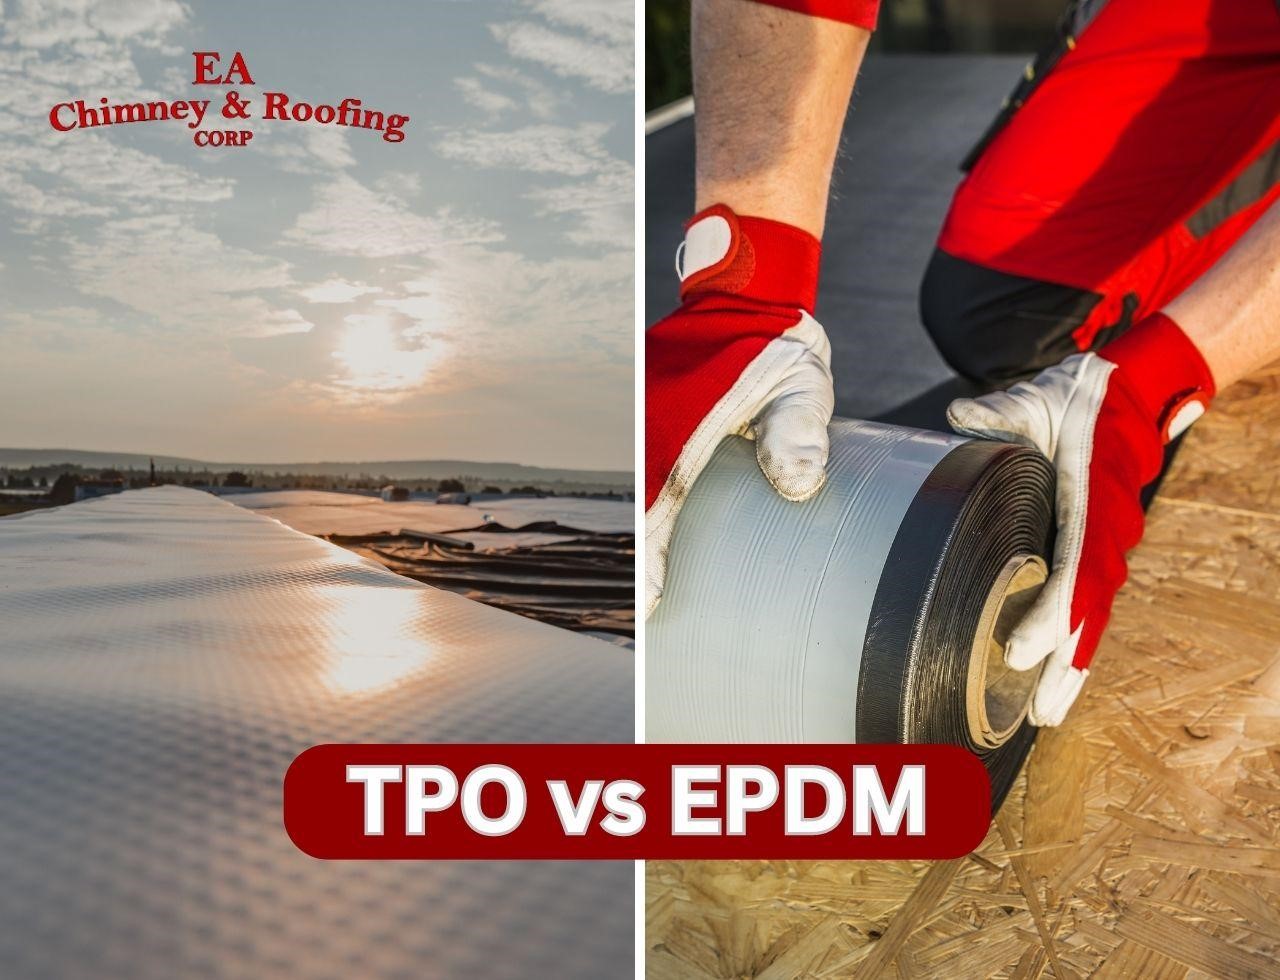 TPO vs EPDM roof– Which Is Right For You?